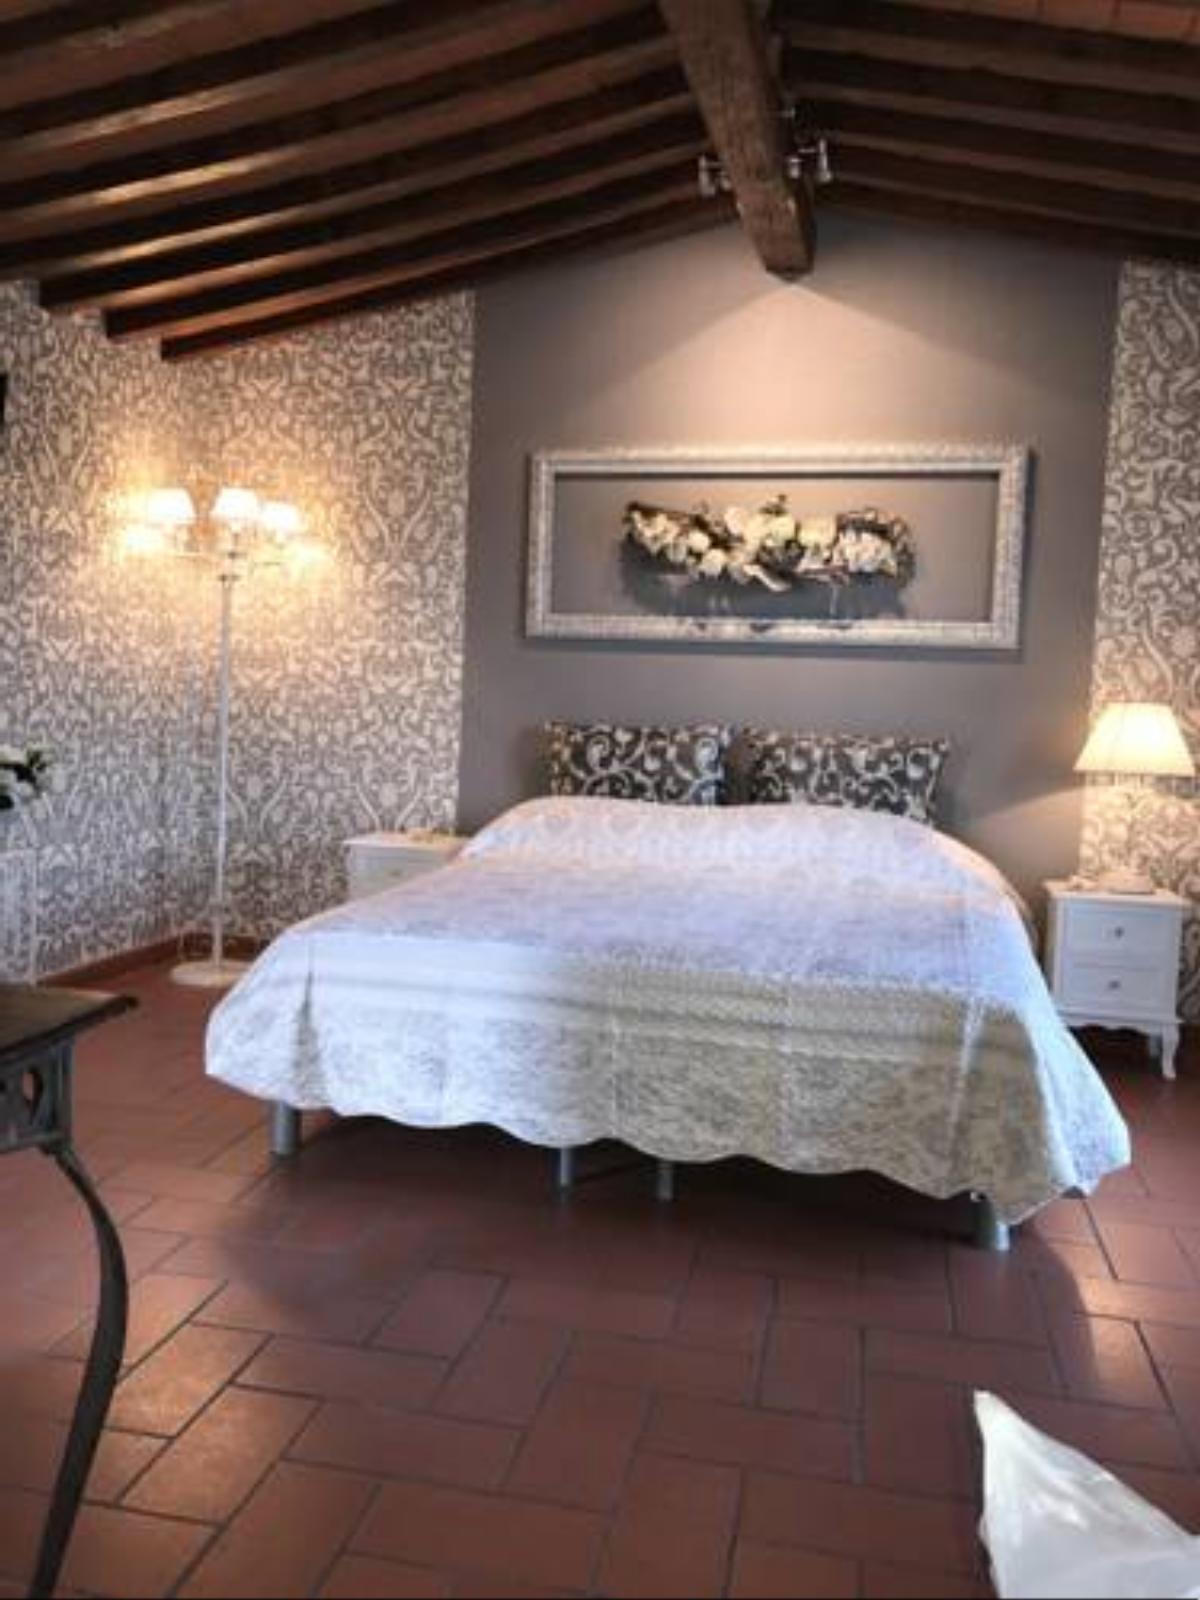 Apartment in Via Panicale Hotel Florence Italy